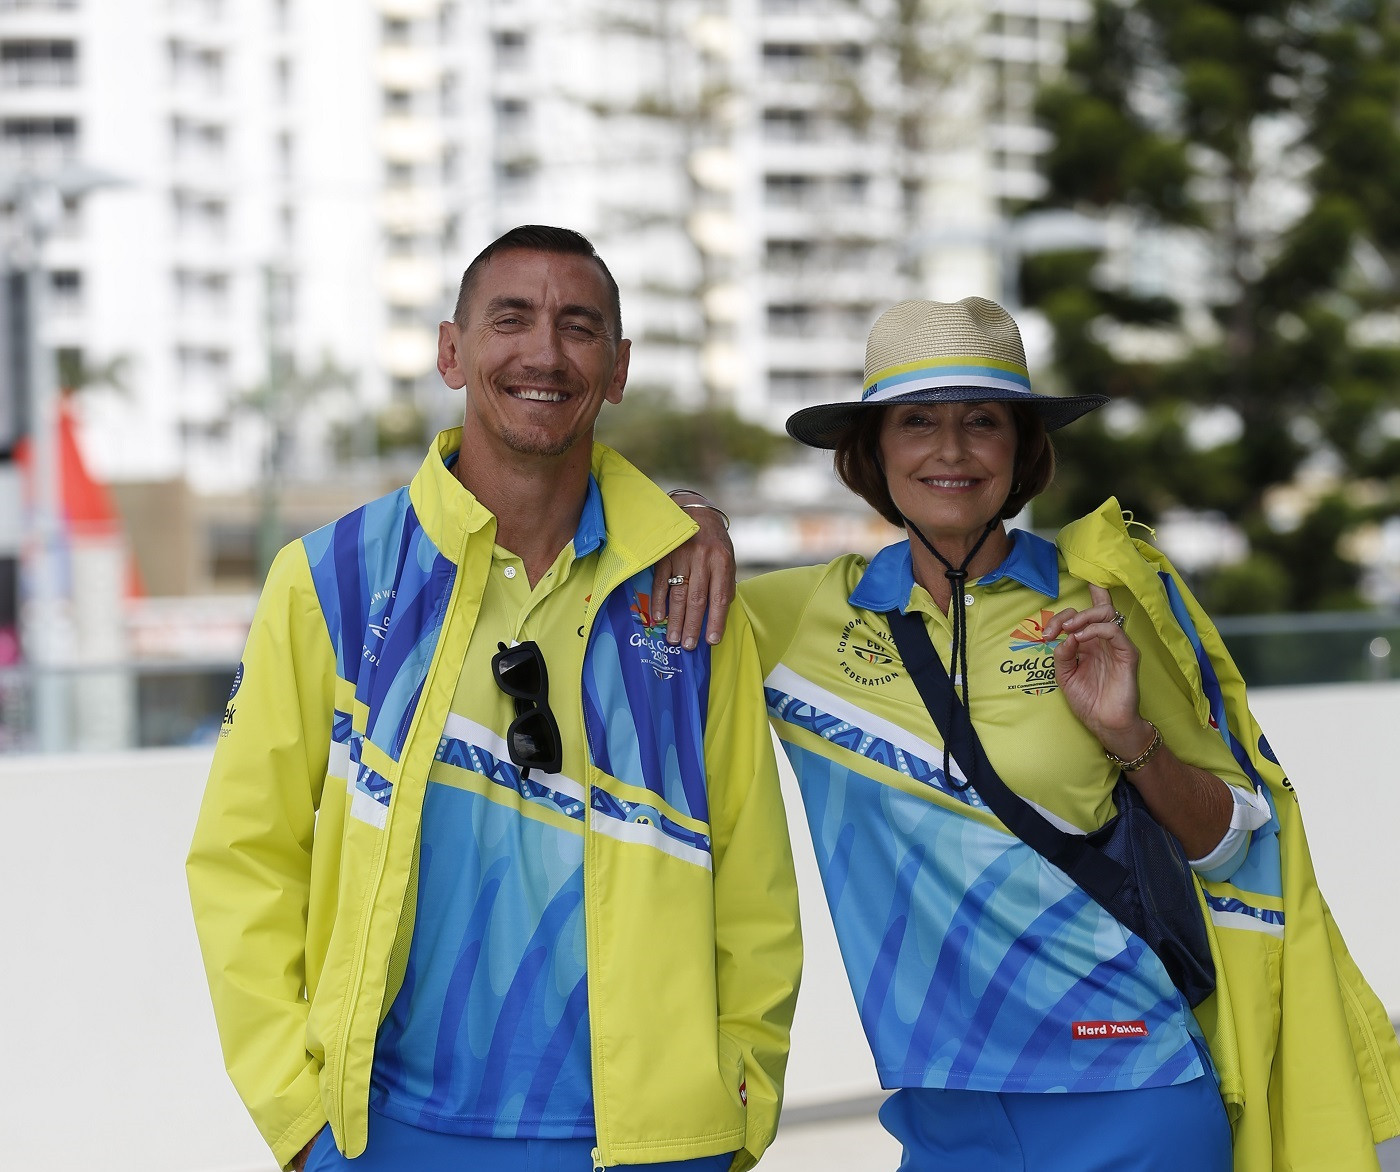 Gold Coast 2018 have revealed the volunteer uniforms for the Commonwealth Games ©Gold Coast 2018